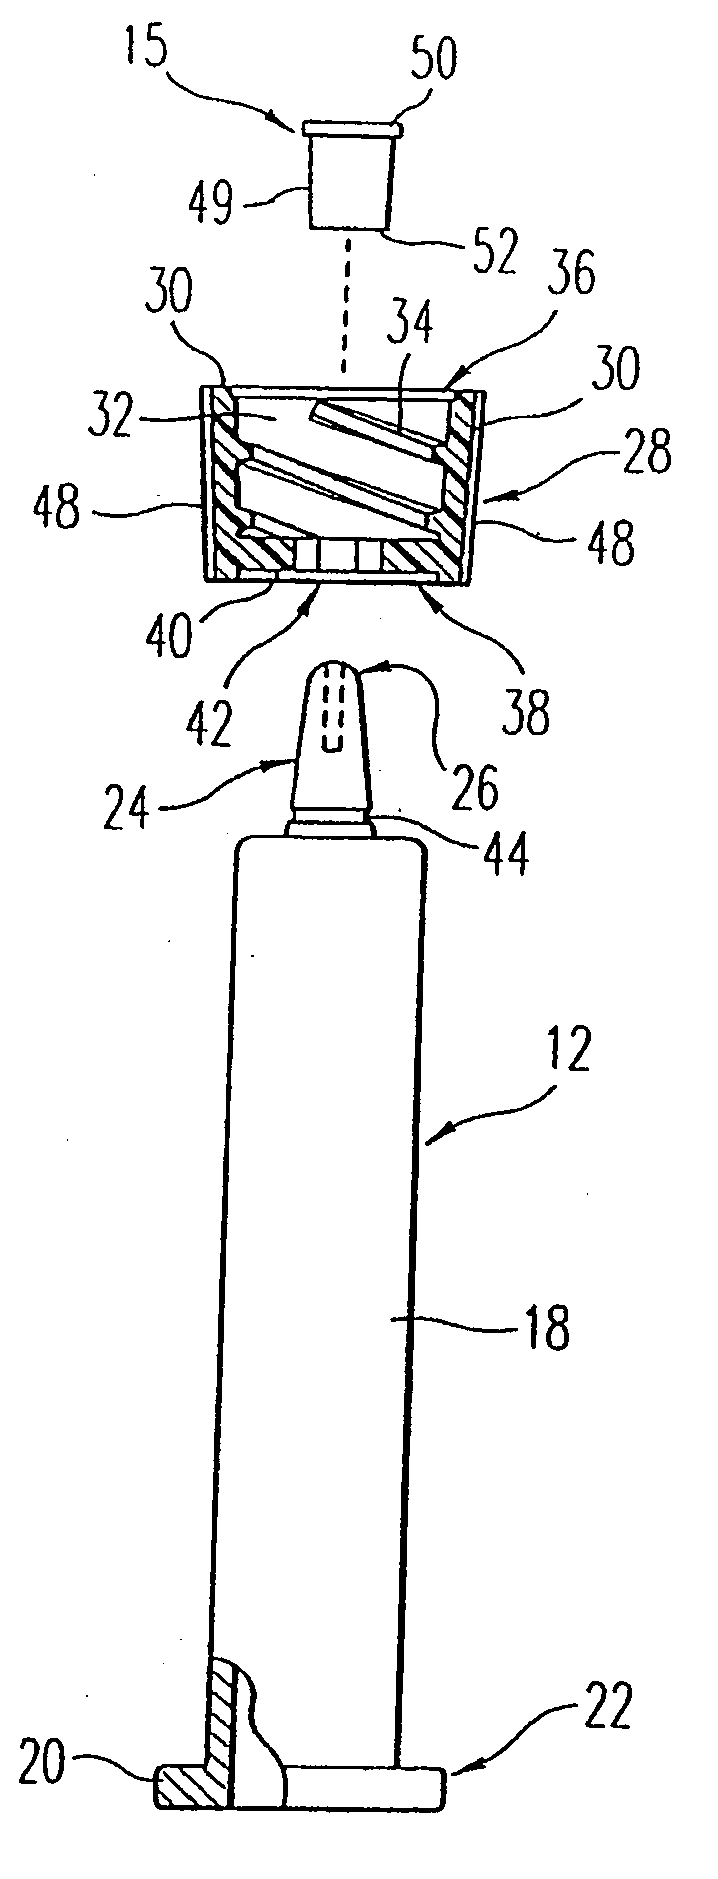 Method and Apparatus for Manufacturing, Filling and Packaging Medical Devices and Medical Containers